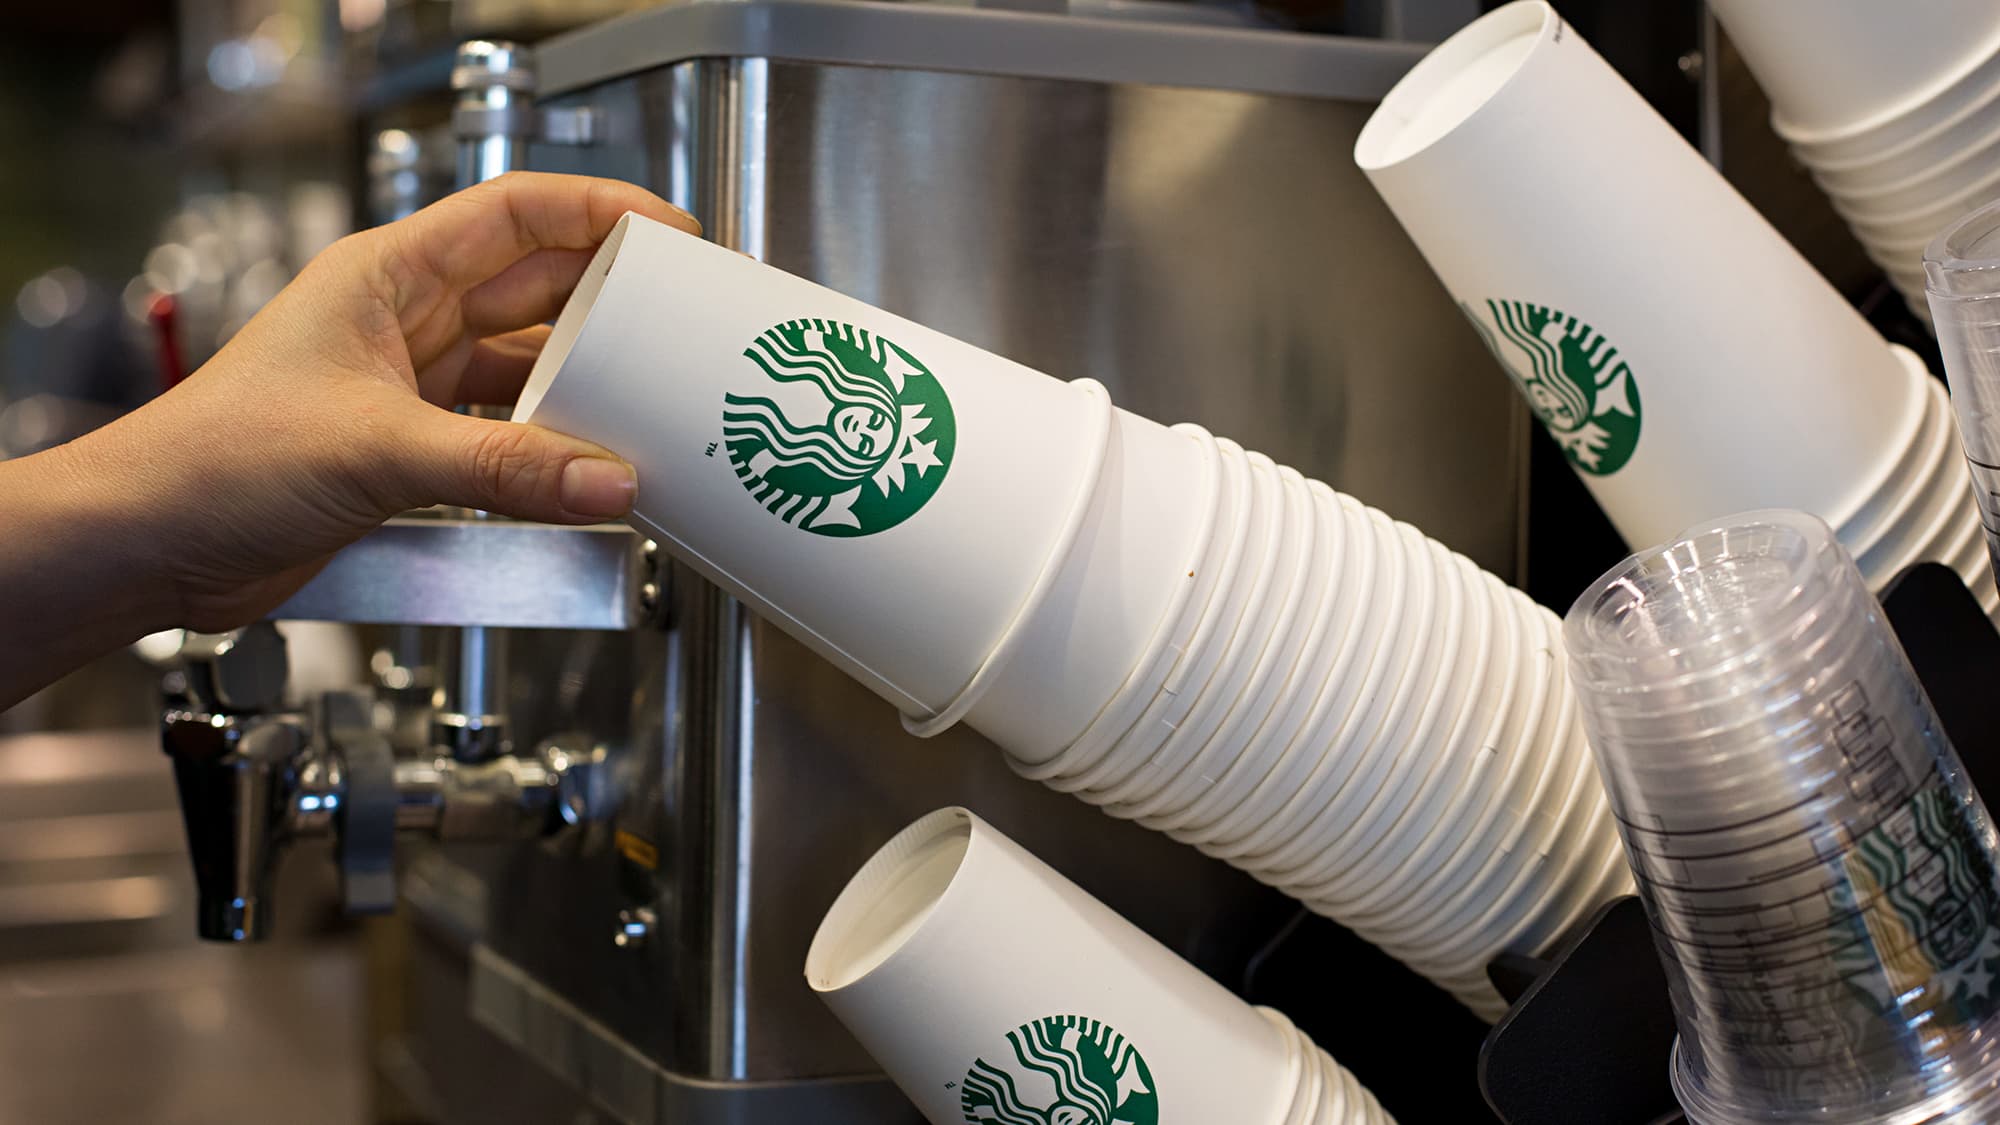 Starbucks CEO denies studies of shortages in cups and low